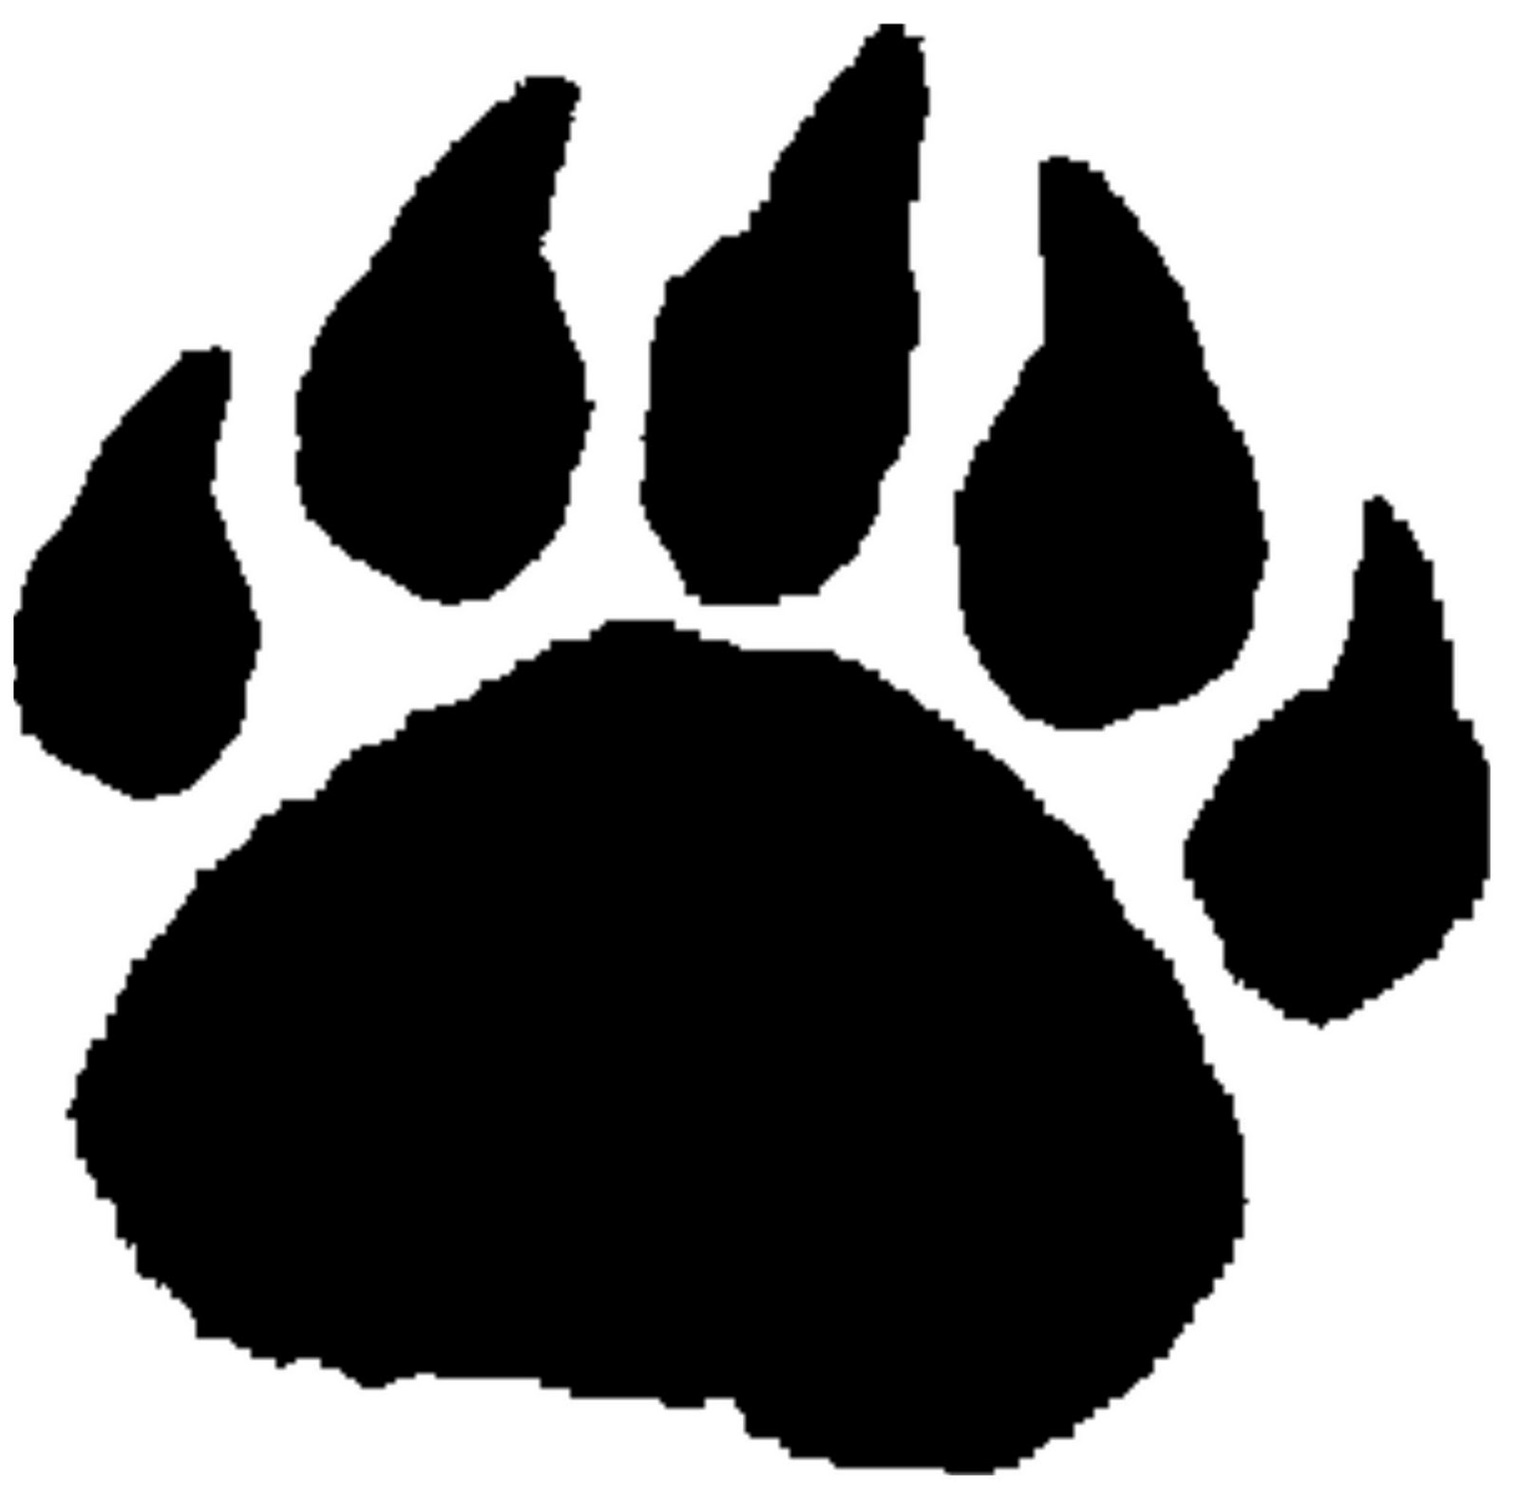 Black Panther Paw Print Clipart - Free to use Clip Art Resource